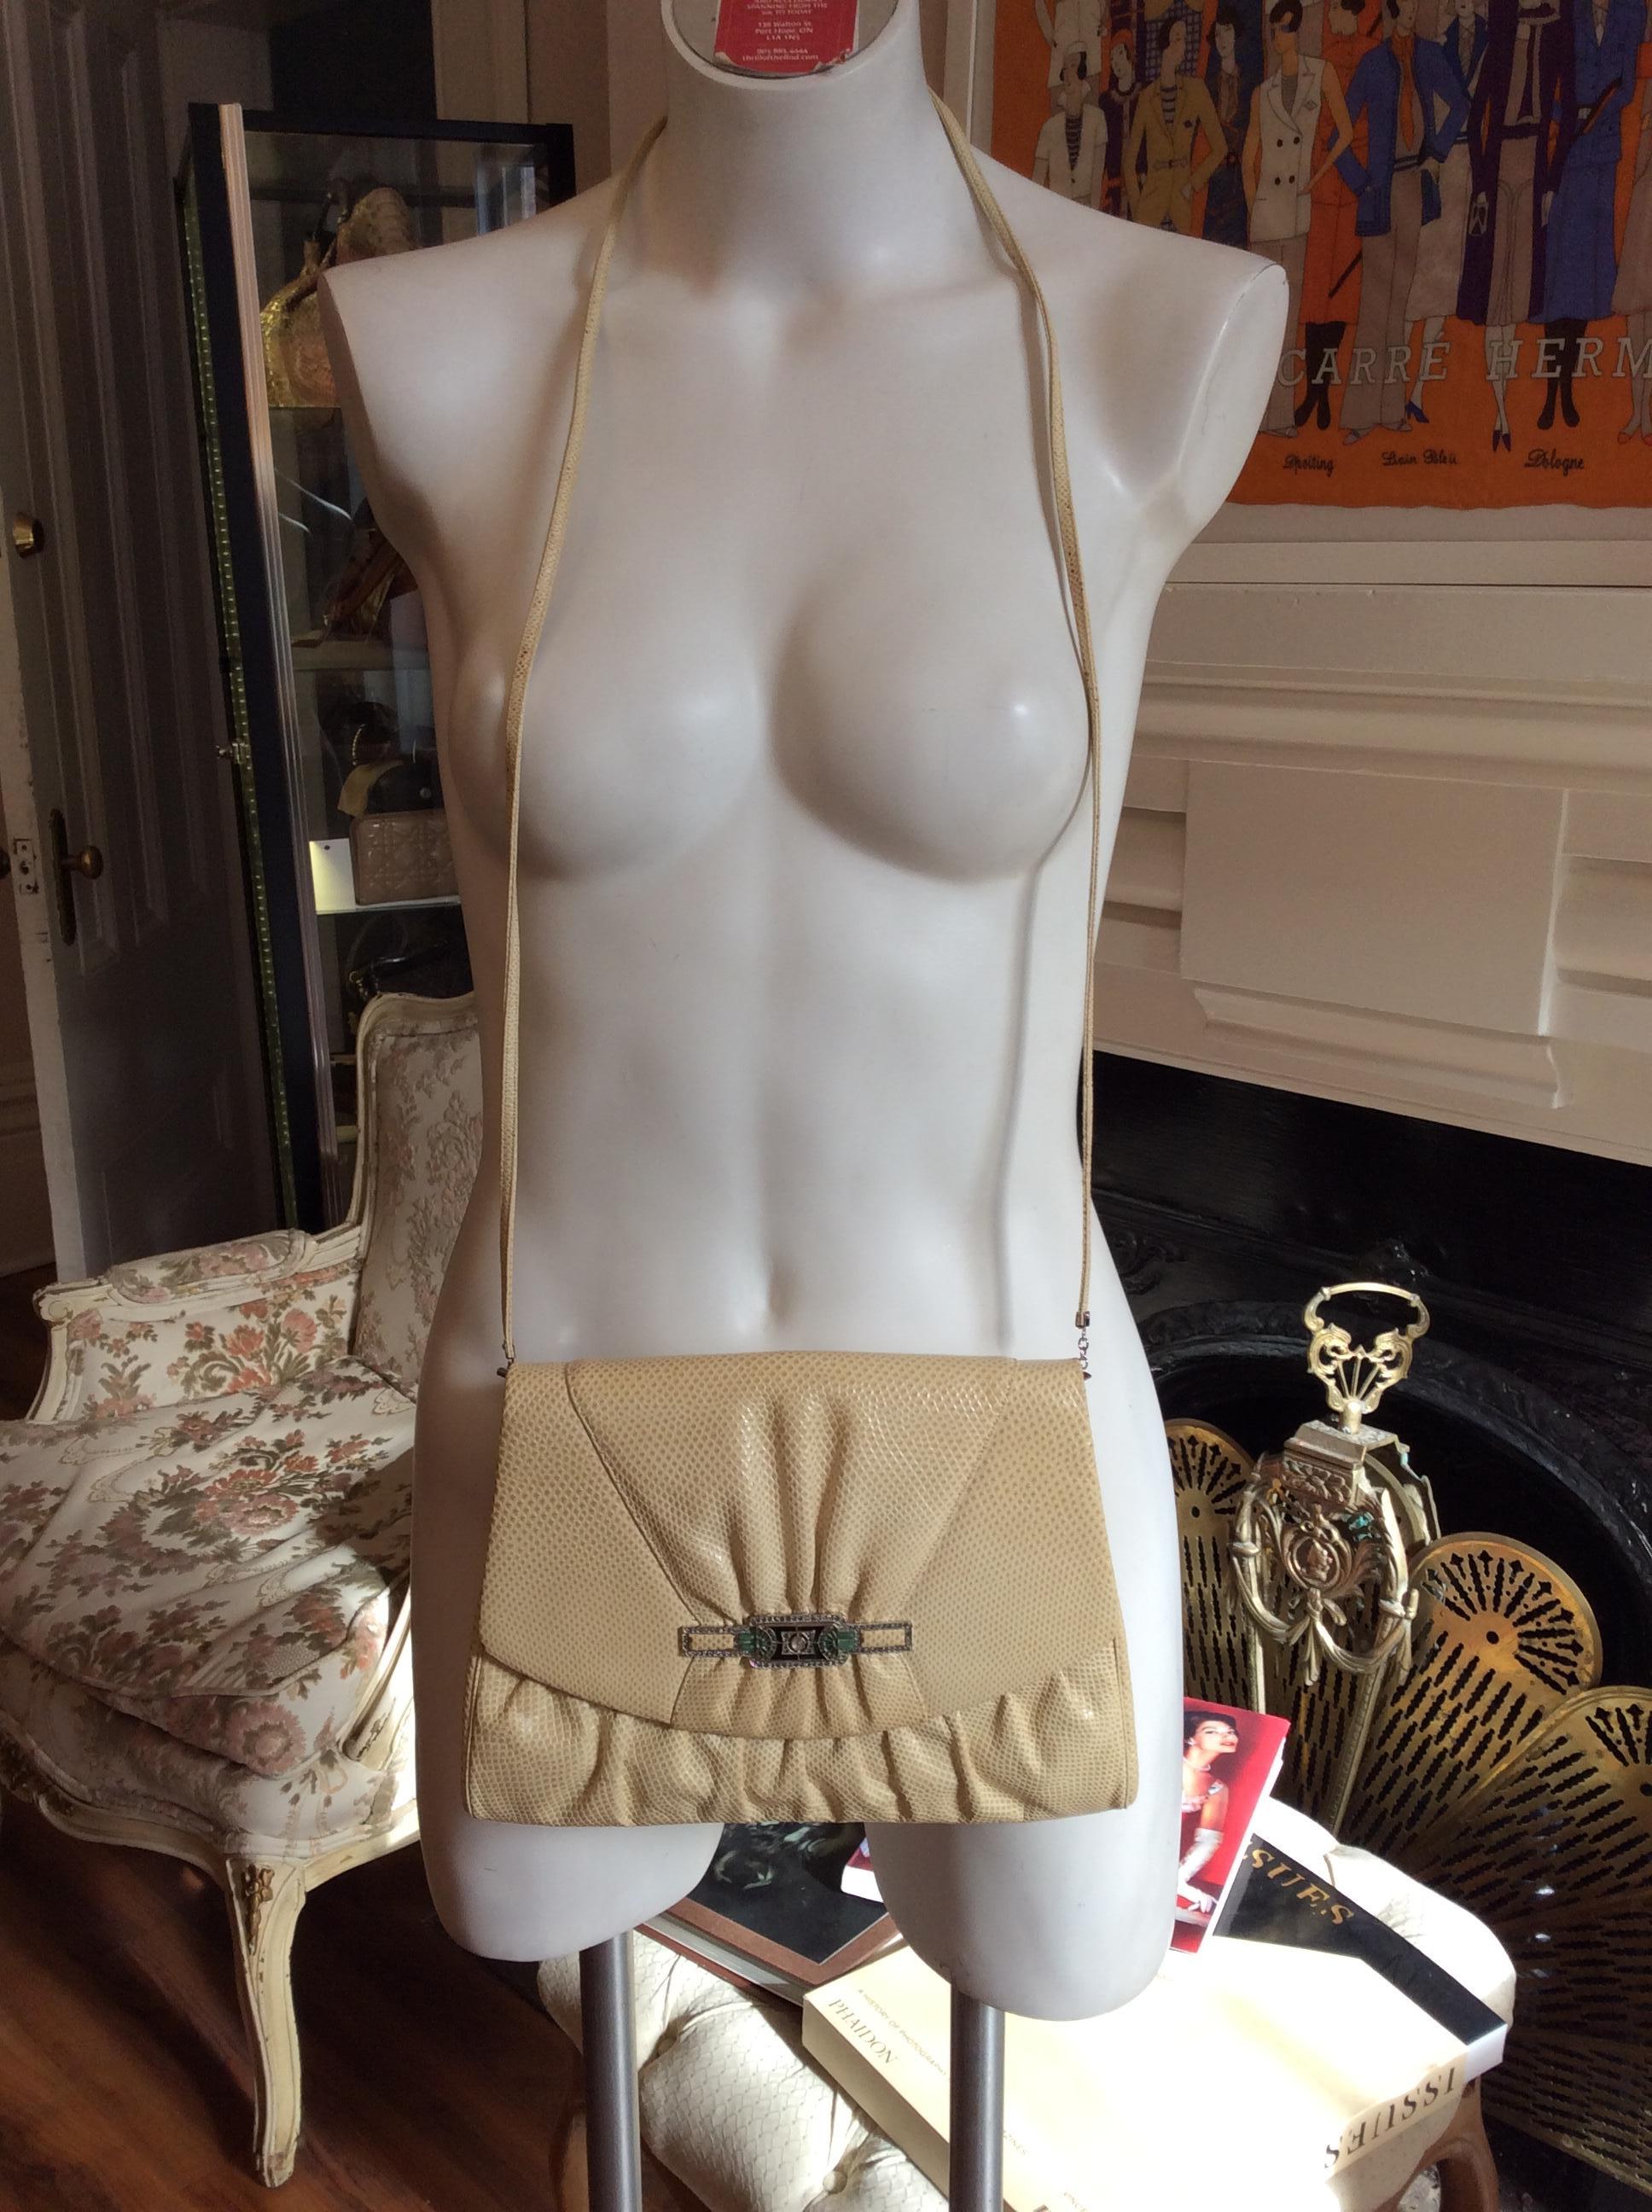 This bag can be worn crossbody or detach the strap and use it as a clutch. There is a slit pocket in the back and the lining features both a zipped and a slit pocket.

The front is decorated with an 